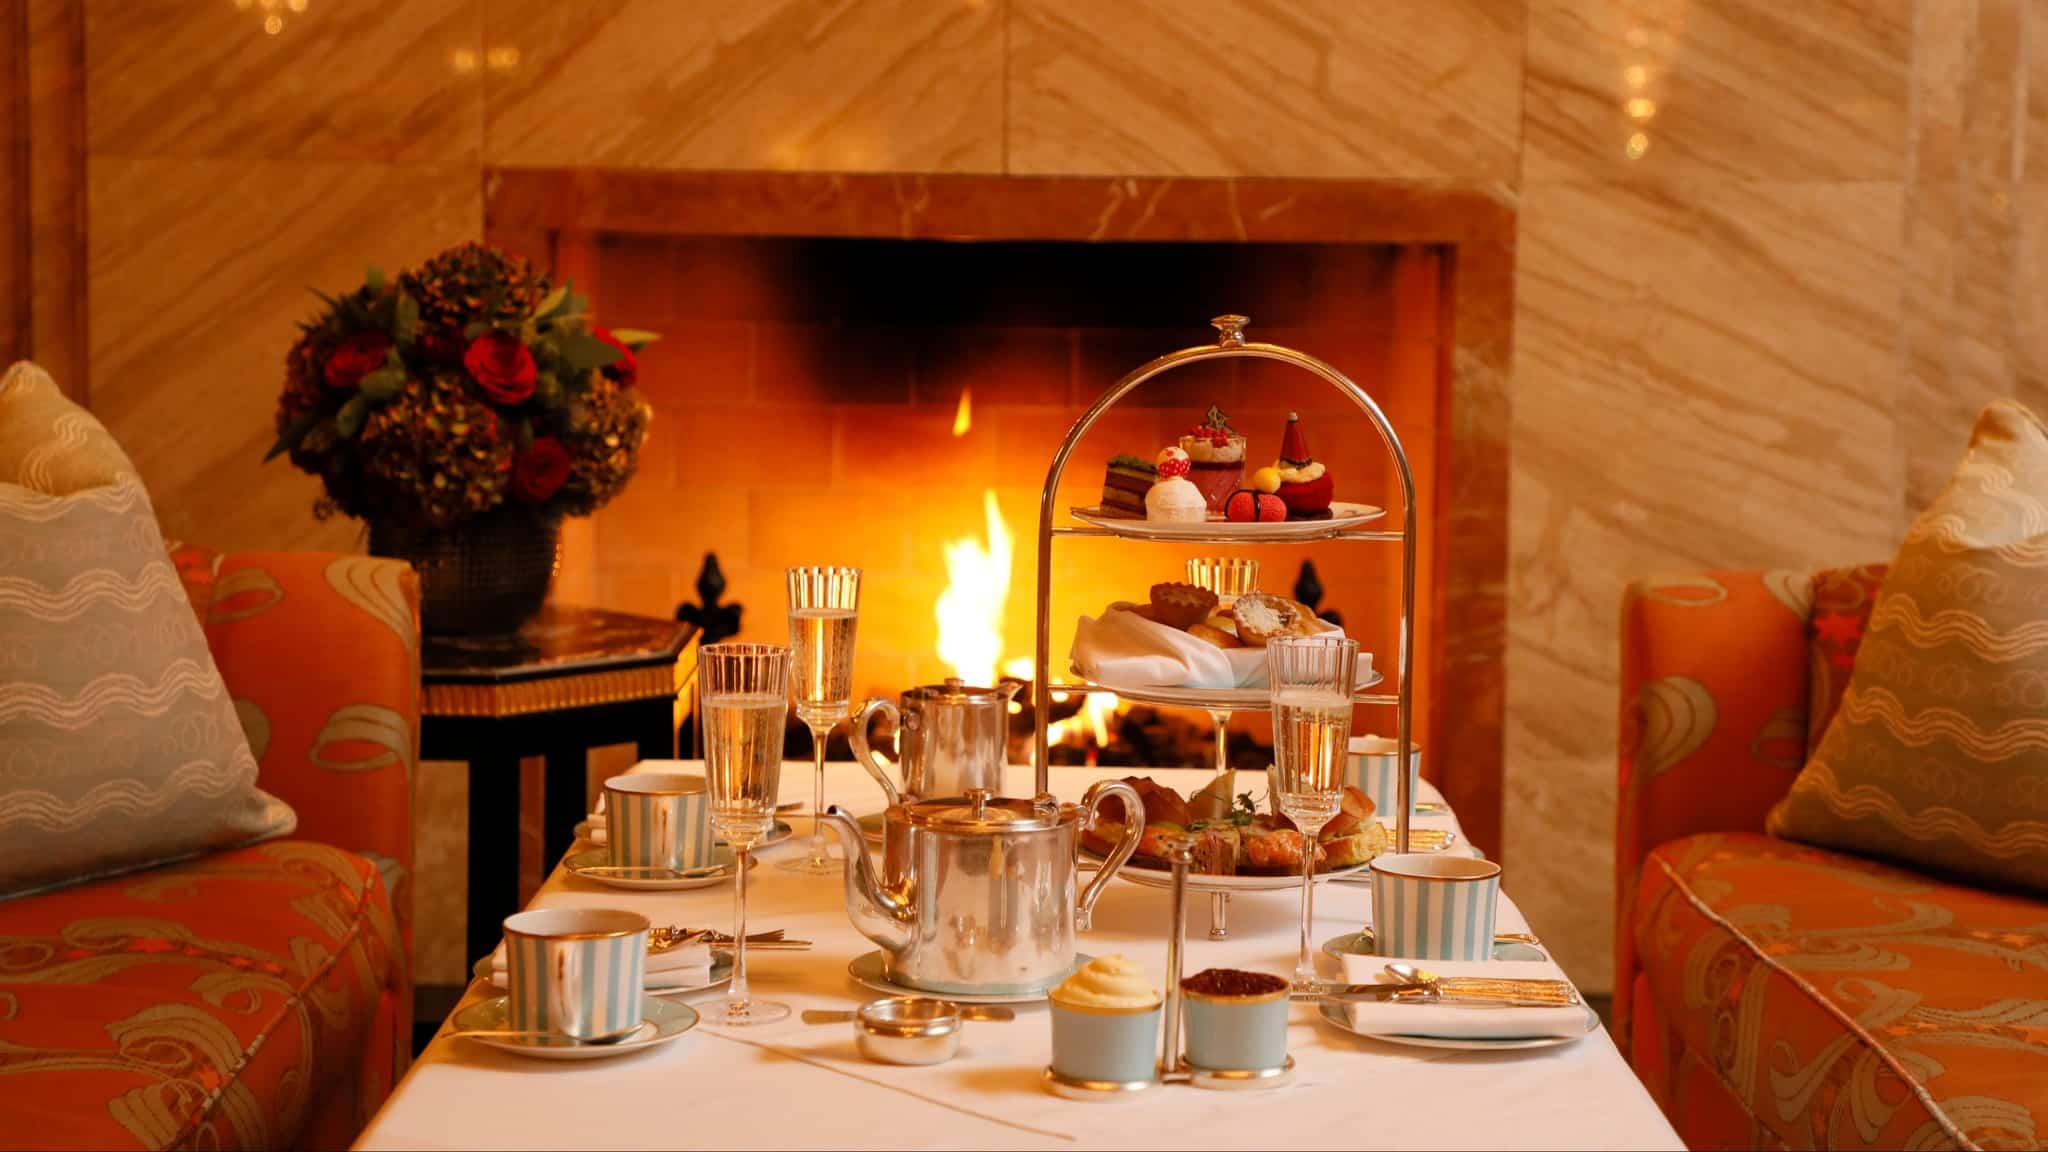 The Westbury at Christmas, with a roaring fire and afternoon tea on the table. 